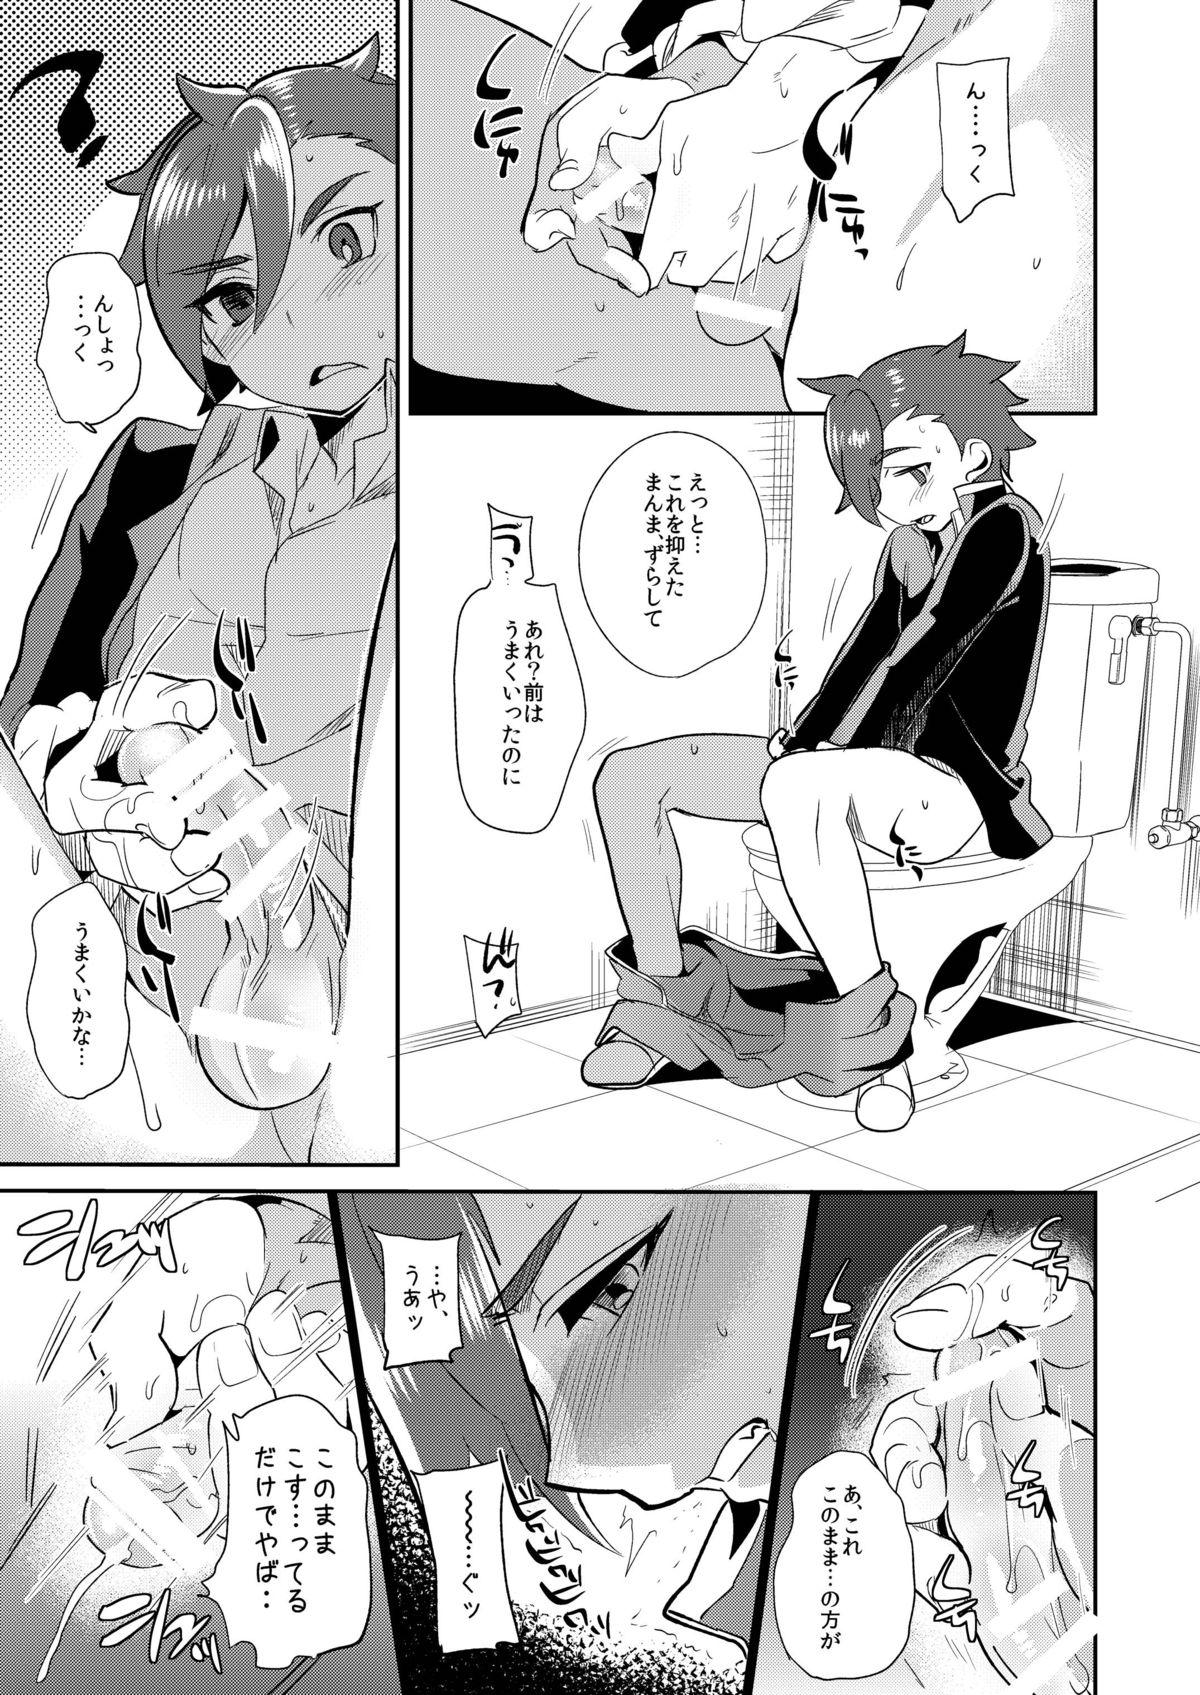 Softcore Onasekai + Omake - Gundam build fighters try Watersports - Page 5